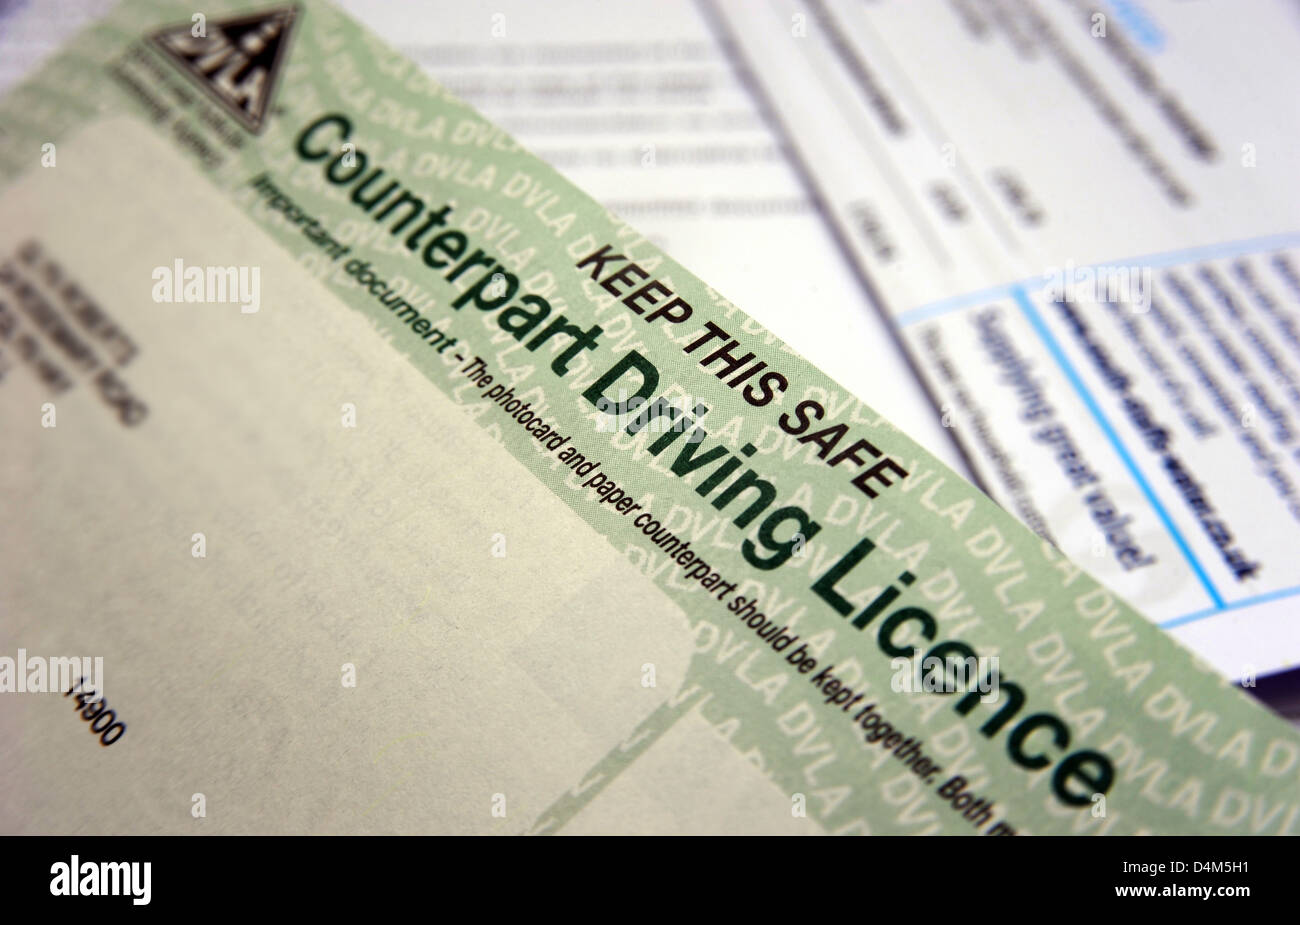 DVLA COUNTERPART DRIVING LICENCE RE  DRIVERS MOTORING OFFENCES POINTS CONVICTIONS MOTORISTS SPEEDING POLICE INSURANCE CAR UK Stock Photo